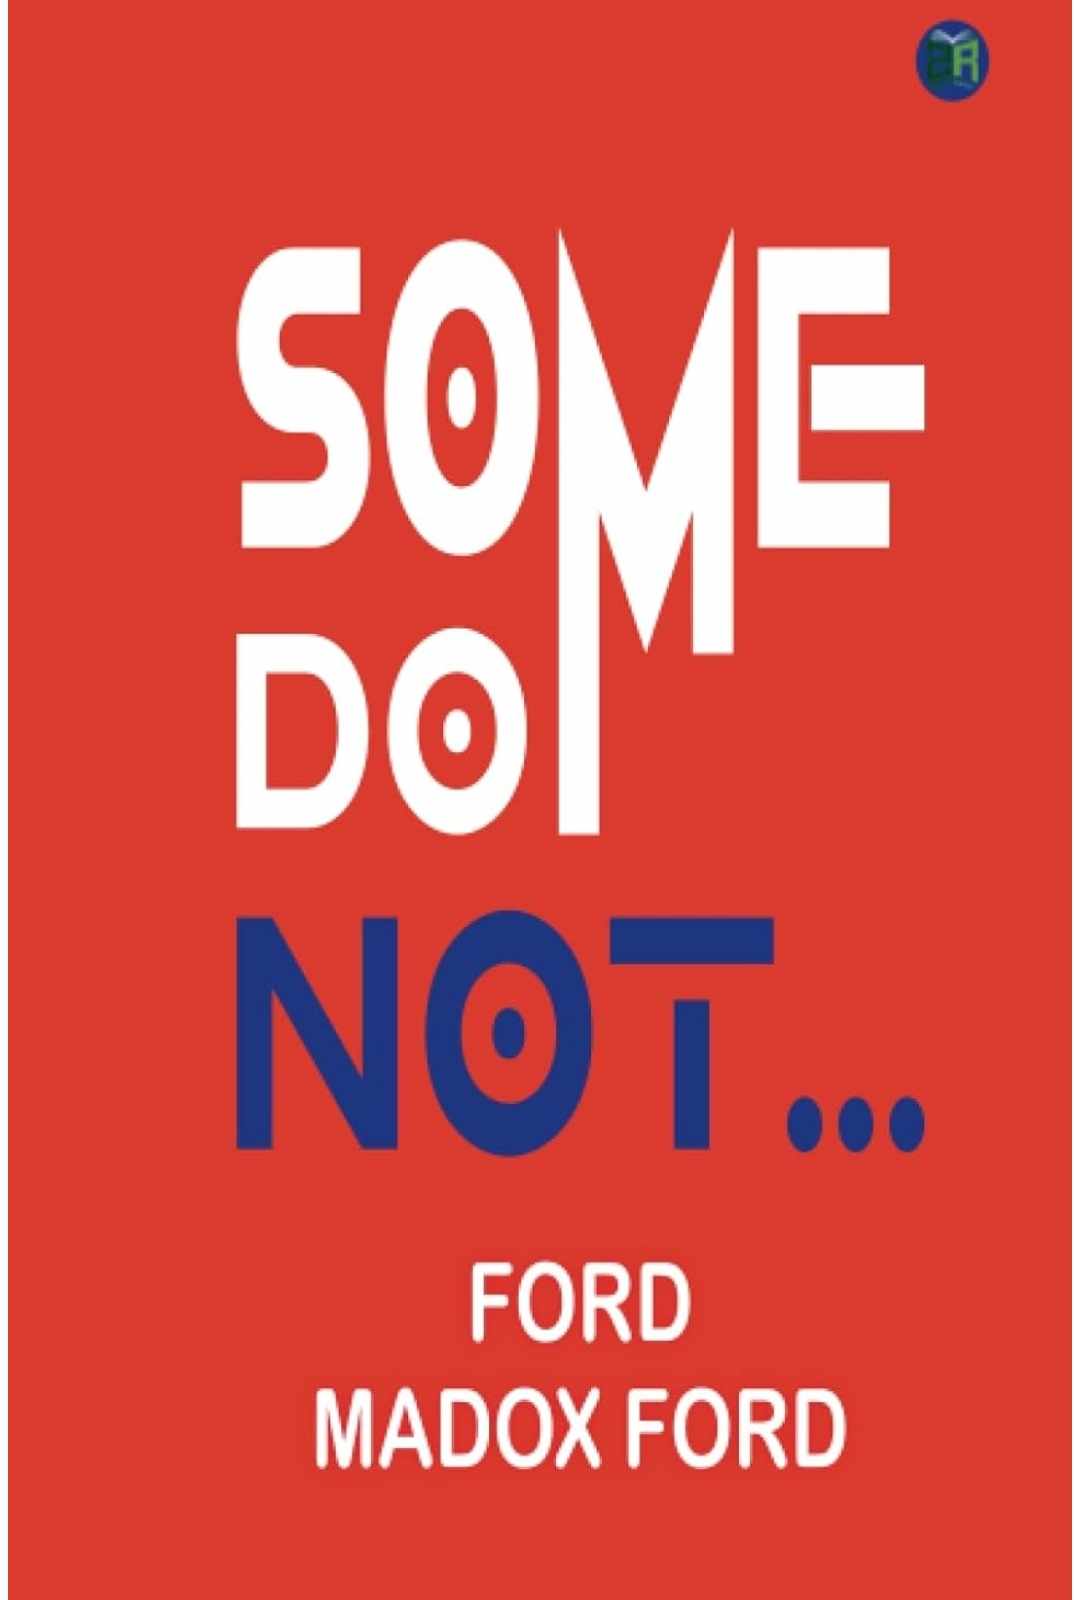 Parade's End Book 1: Some Do Not by Ford Madox Ford